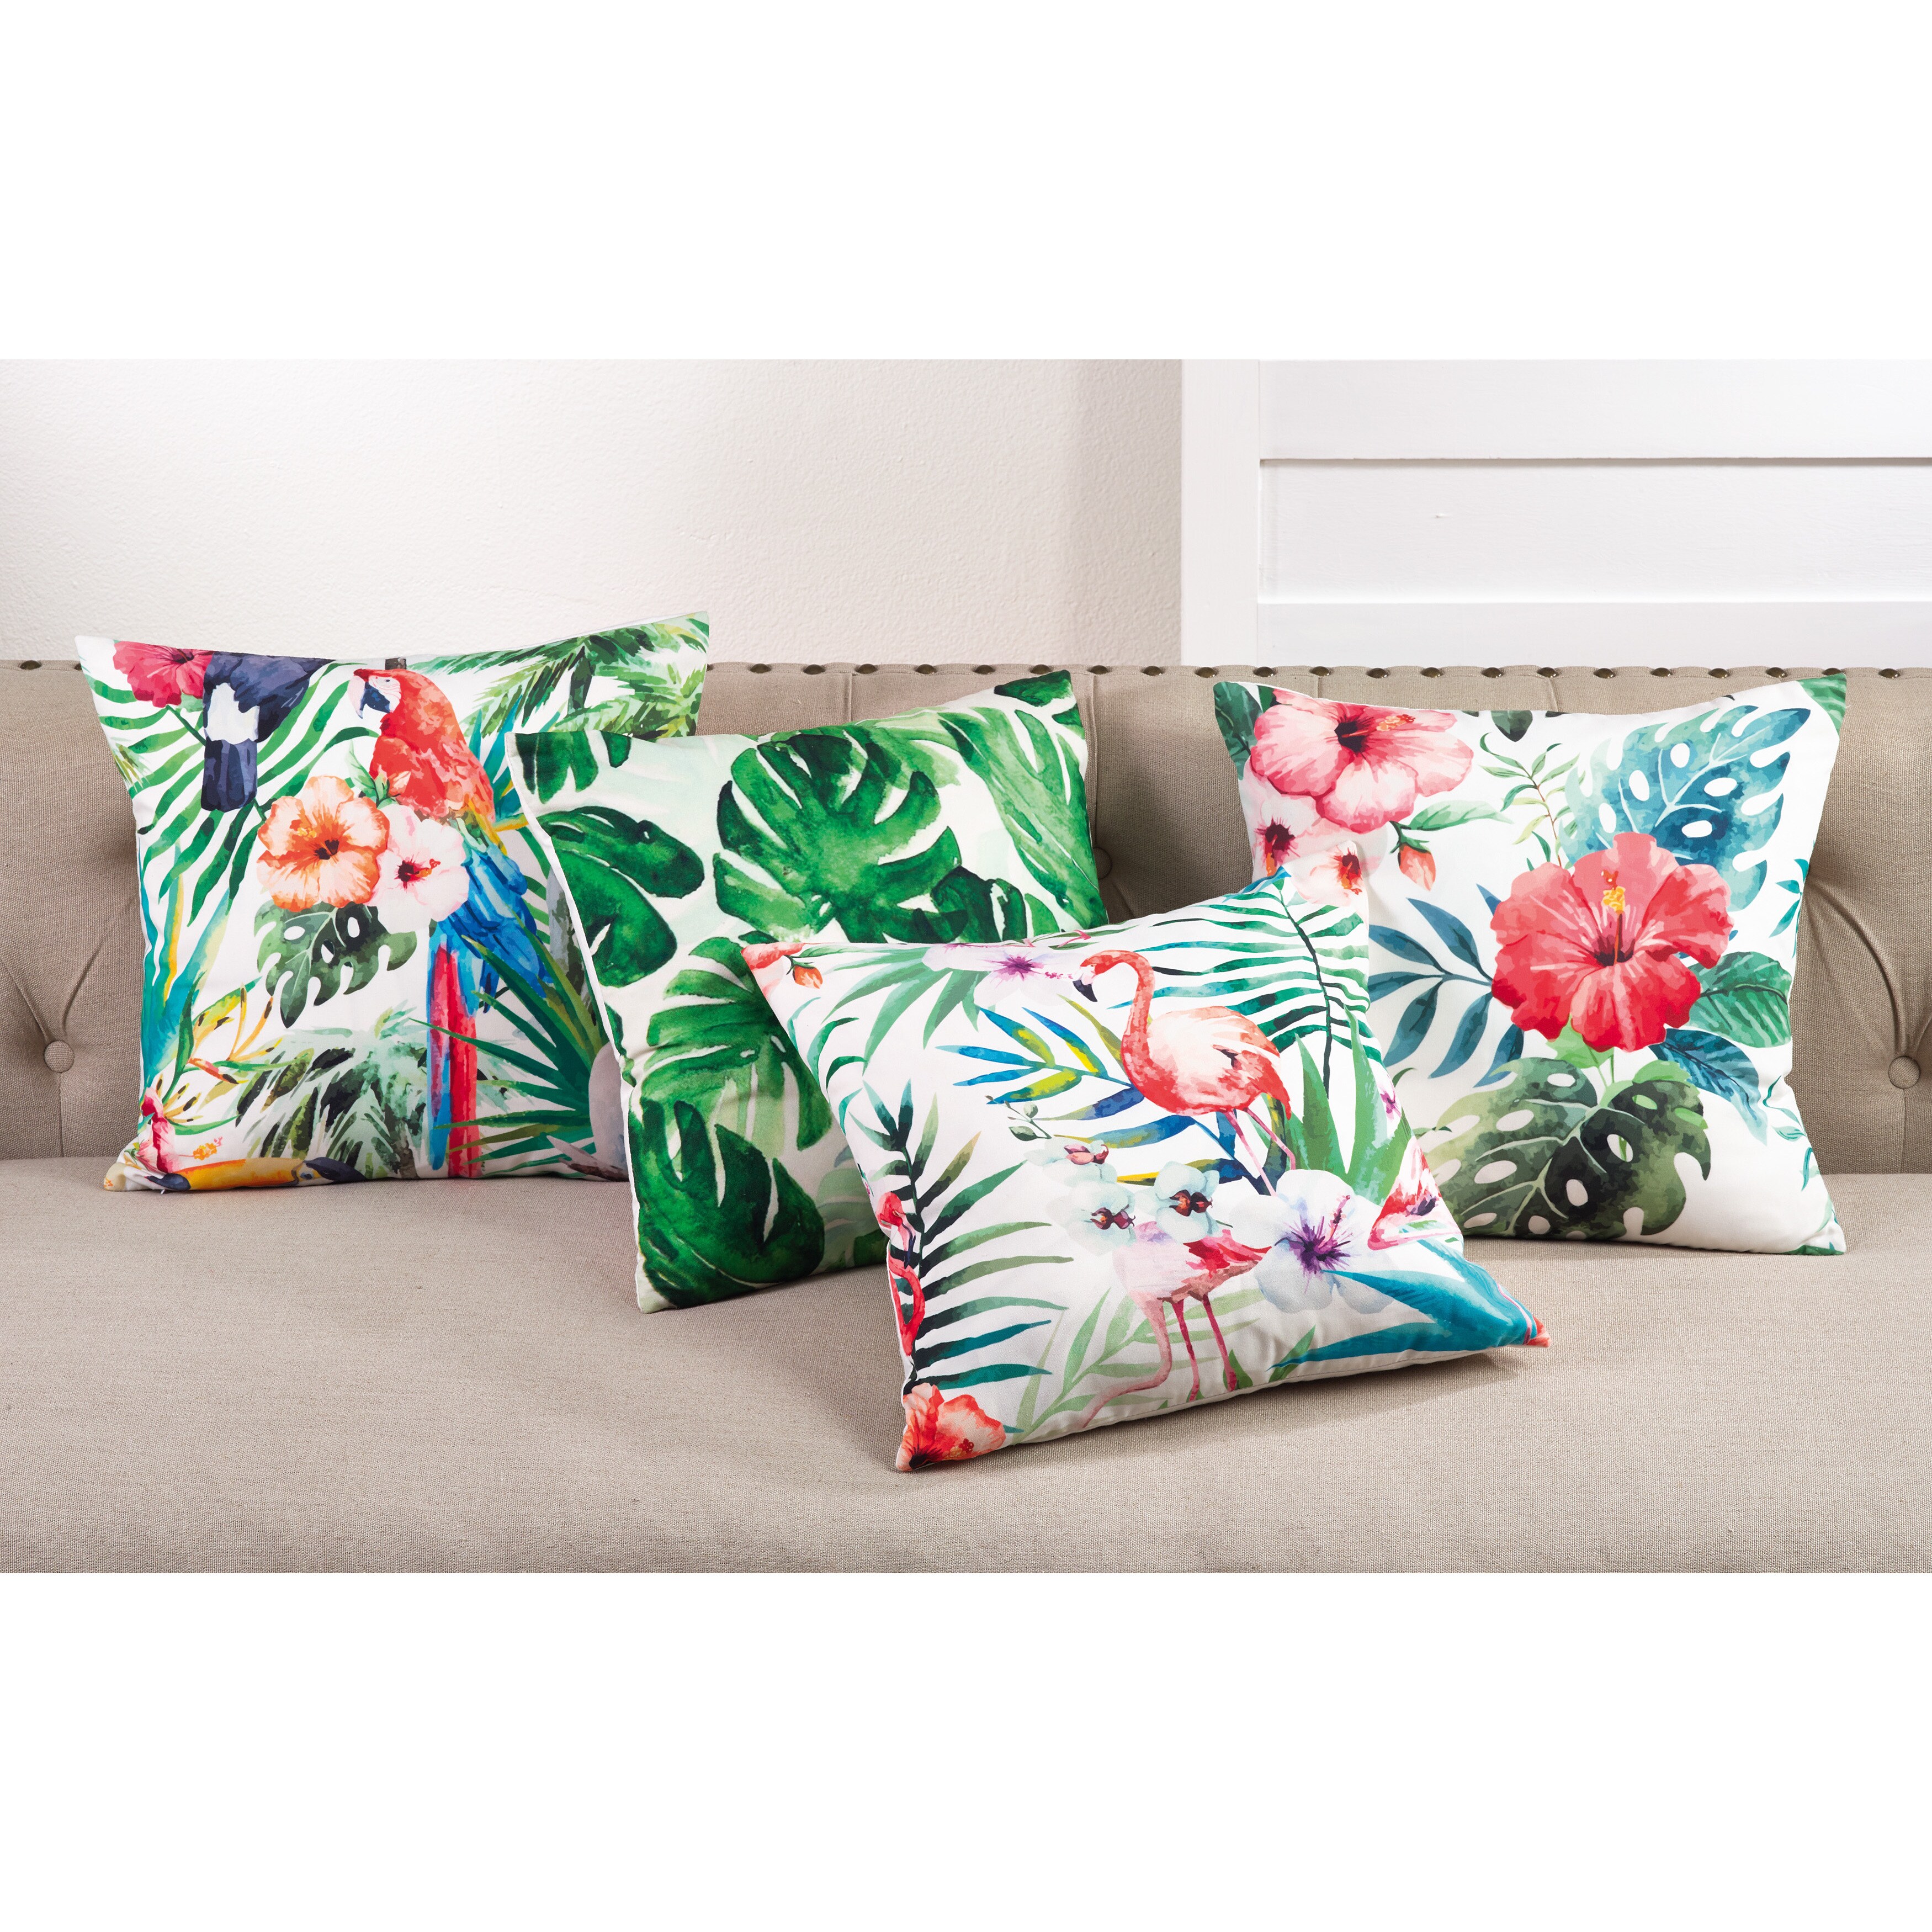 Tropical Floral Print Poly Filled Throw Pillow